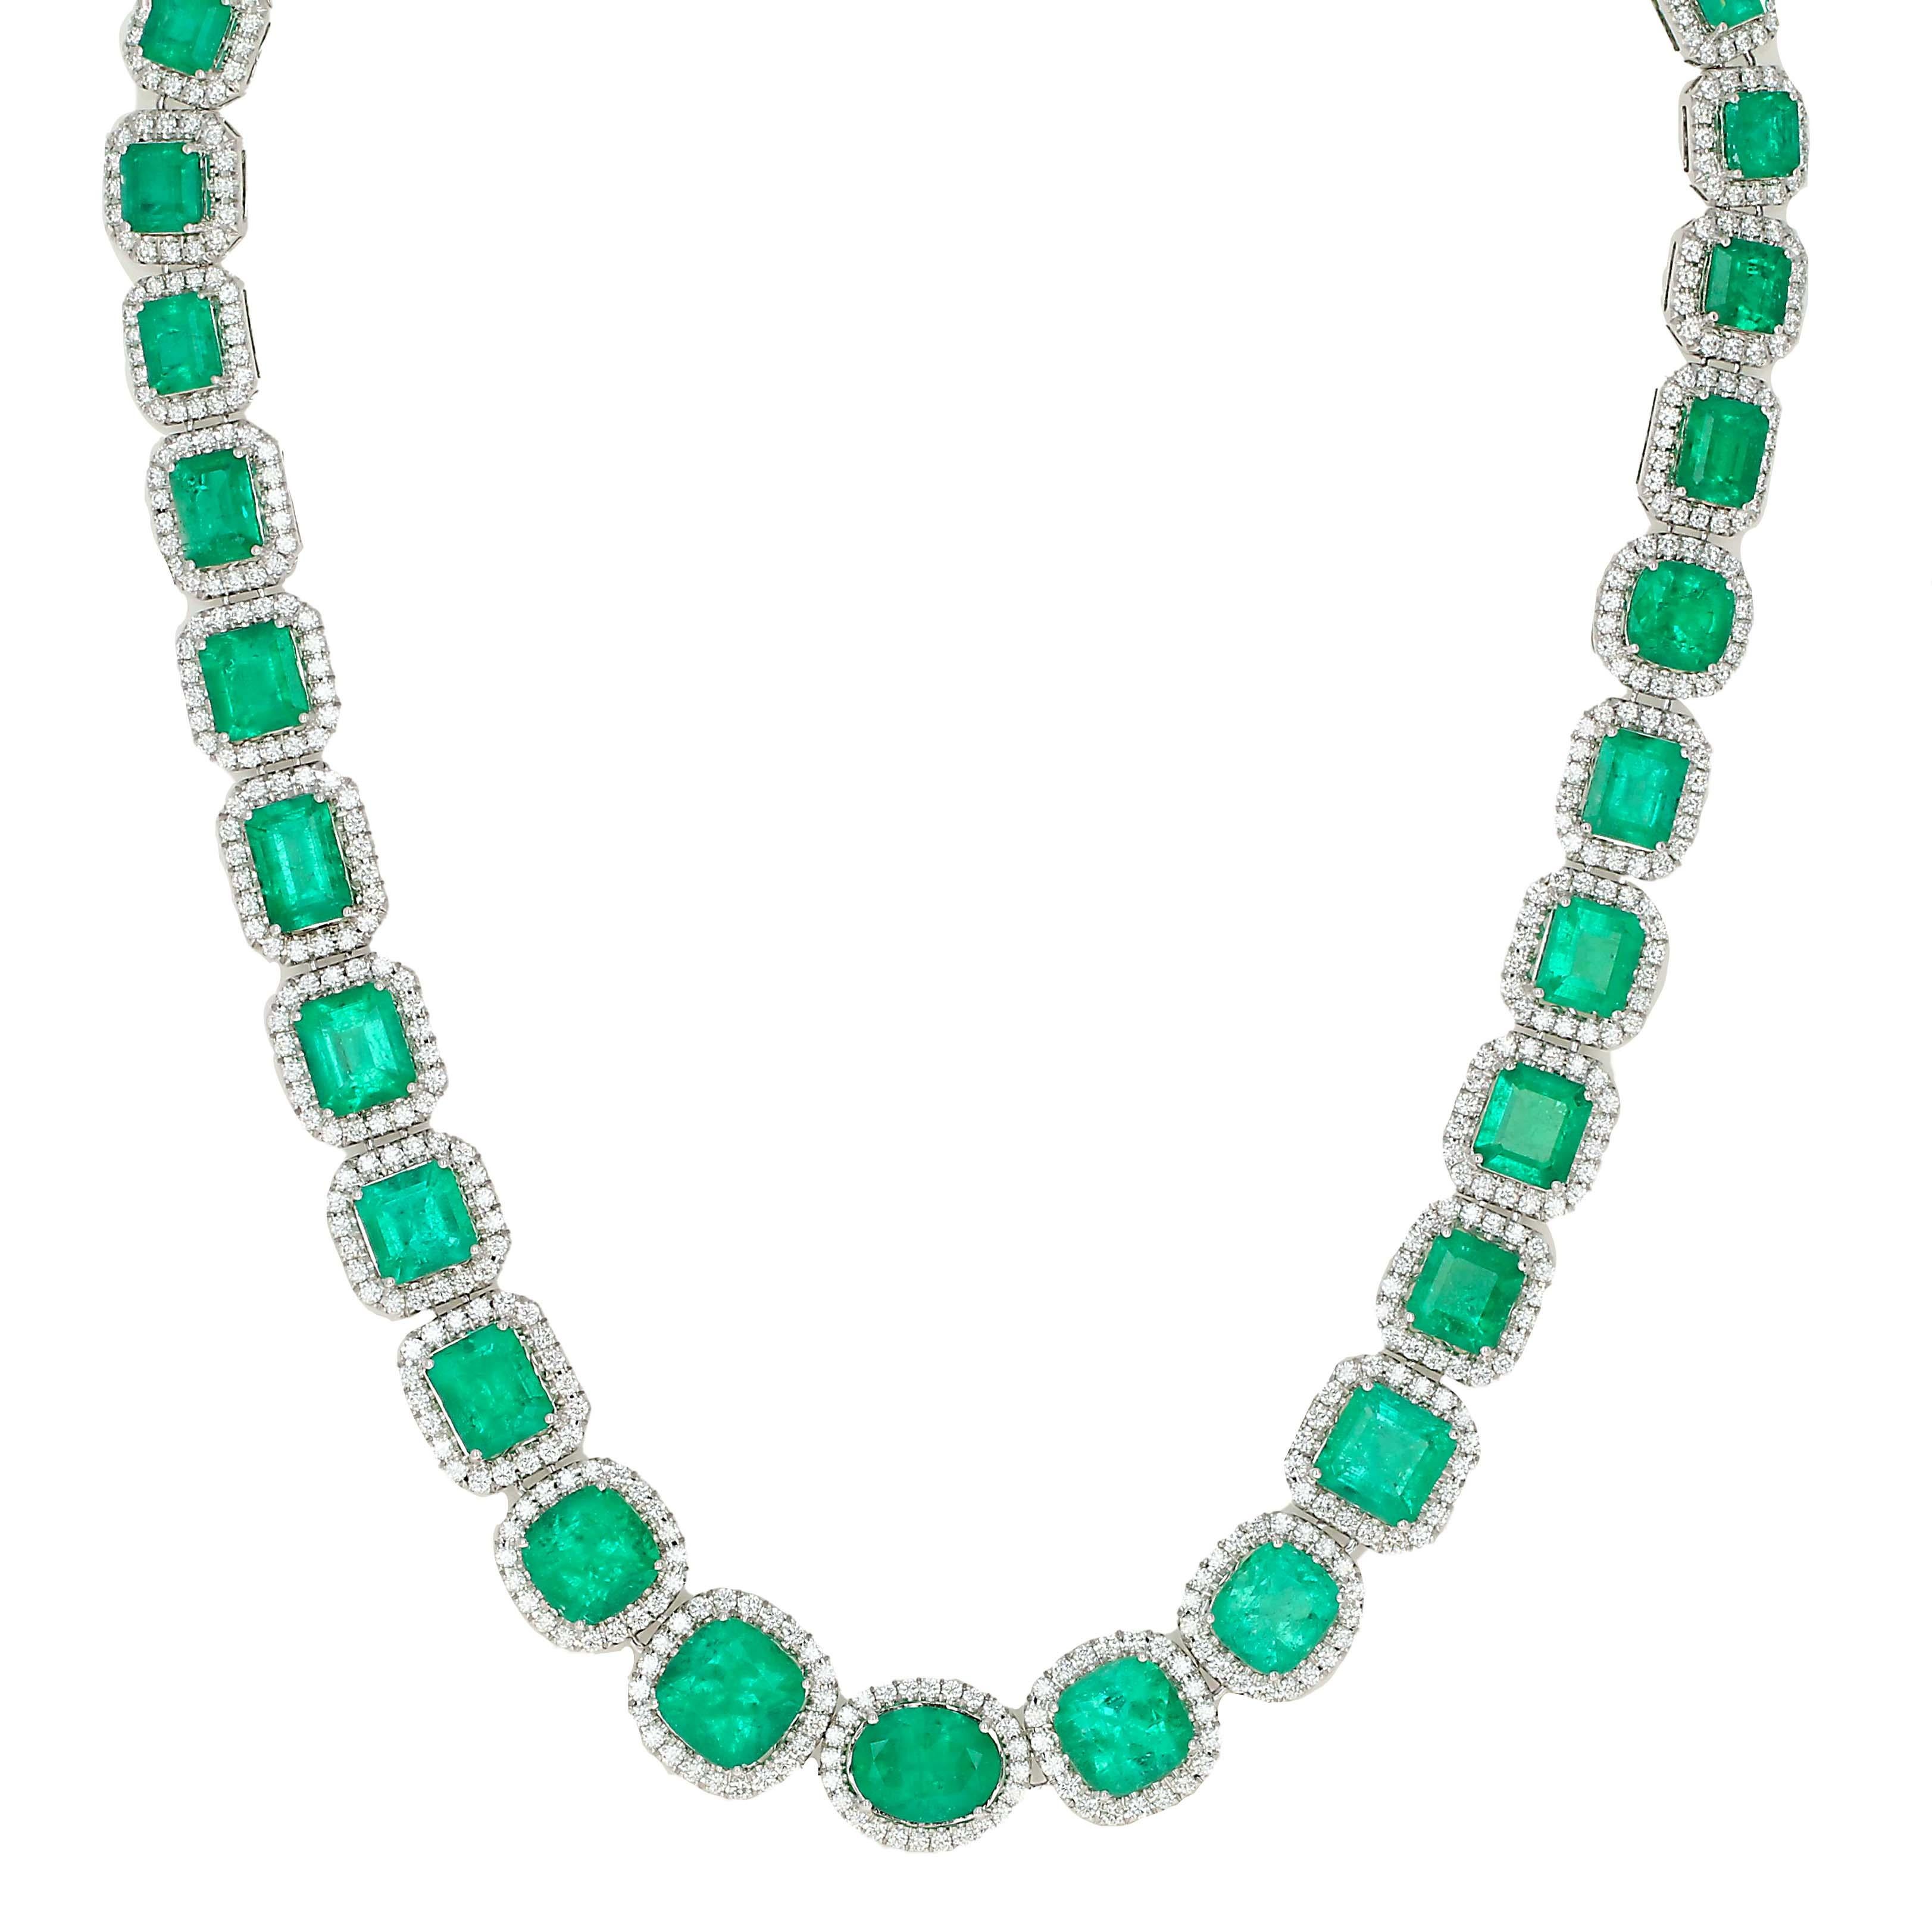 A one-of-a-kind impressive emerald and diamond necklace. A vibrant, bold, and vivid emerald and diamond necklace crafted from 18 karat white gold. This necklace exudes luxury and sophistication, featuring 35 natural emeralds varying in shape and